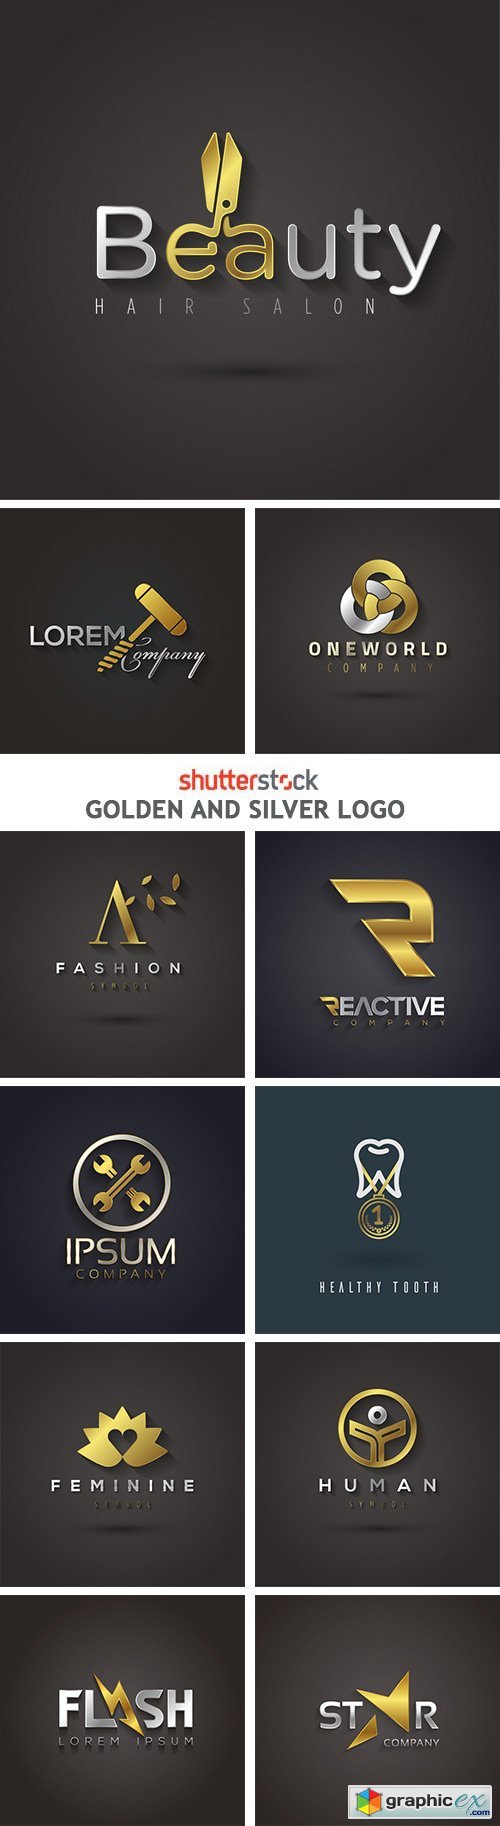 Golden And Silver Logo - 25xEPS